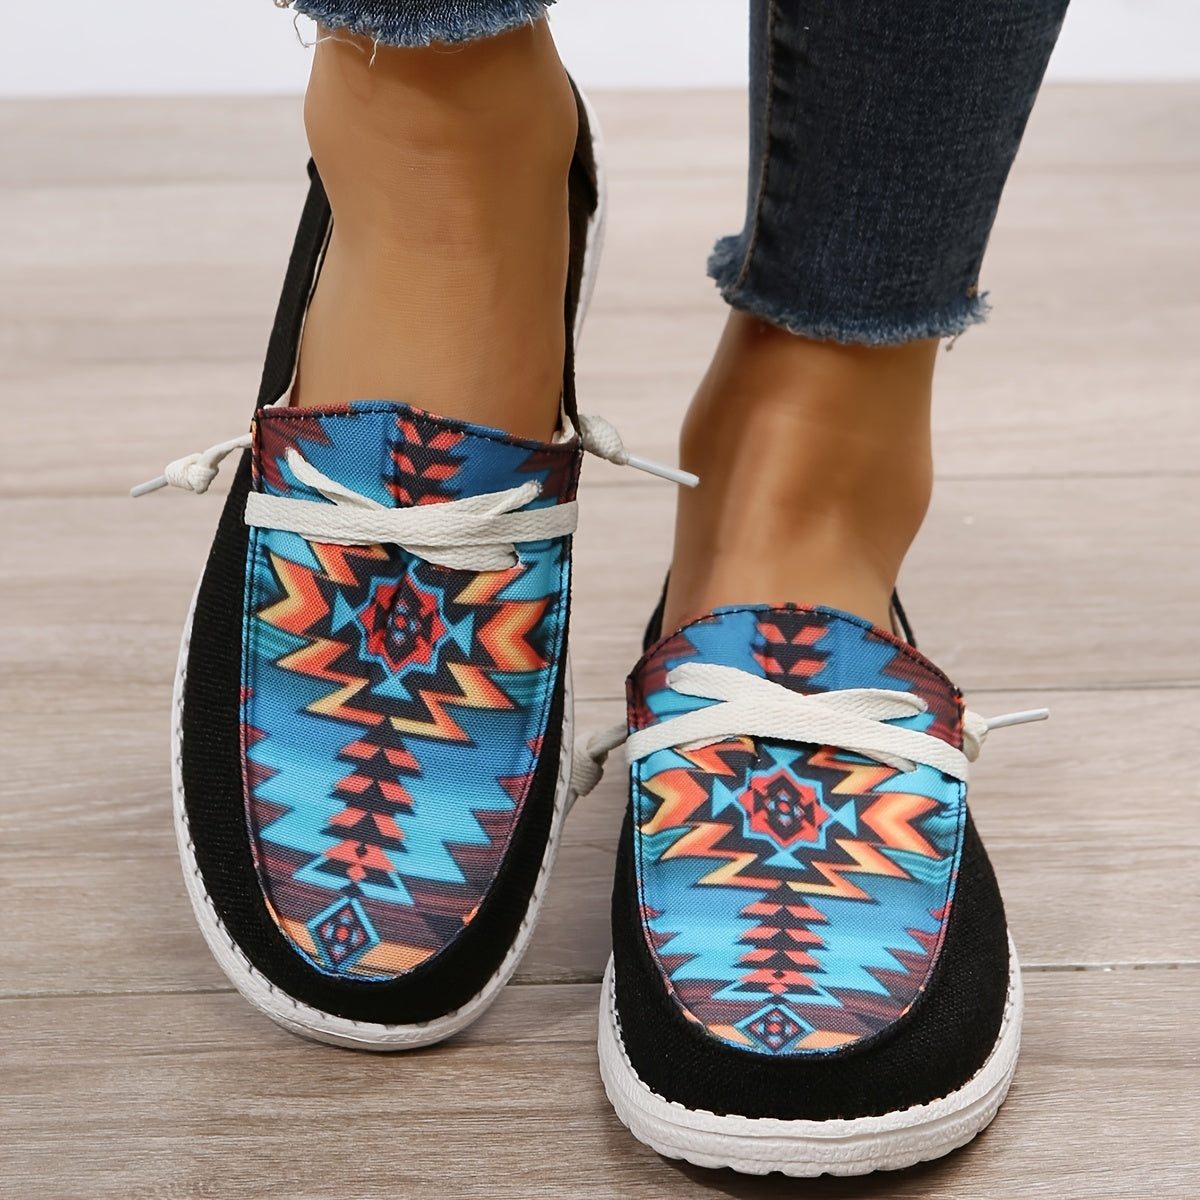 Geometric Flat Canvas Shoes, Lightweight Non-slip Low Tops